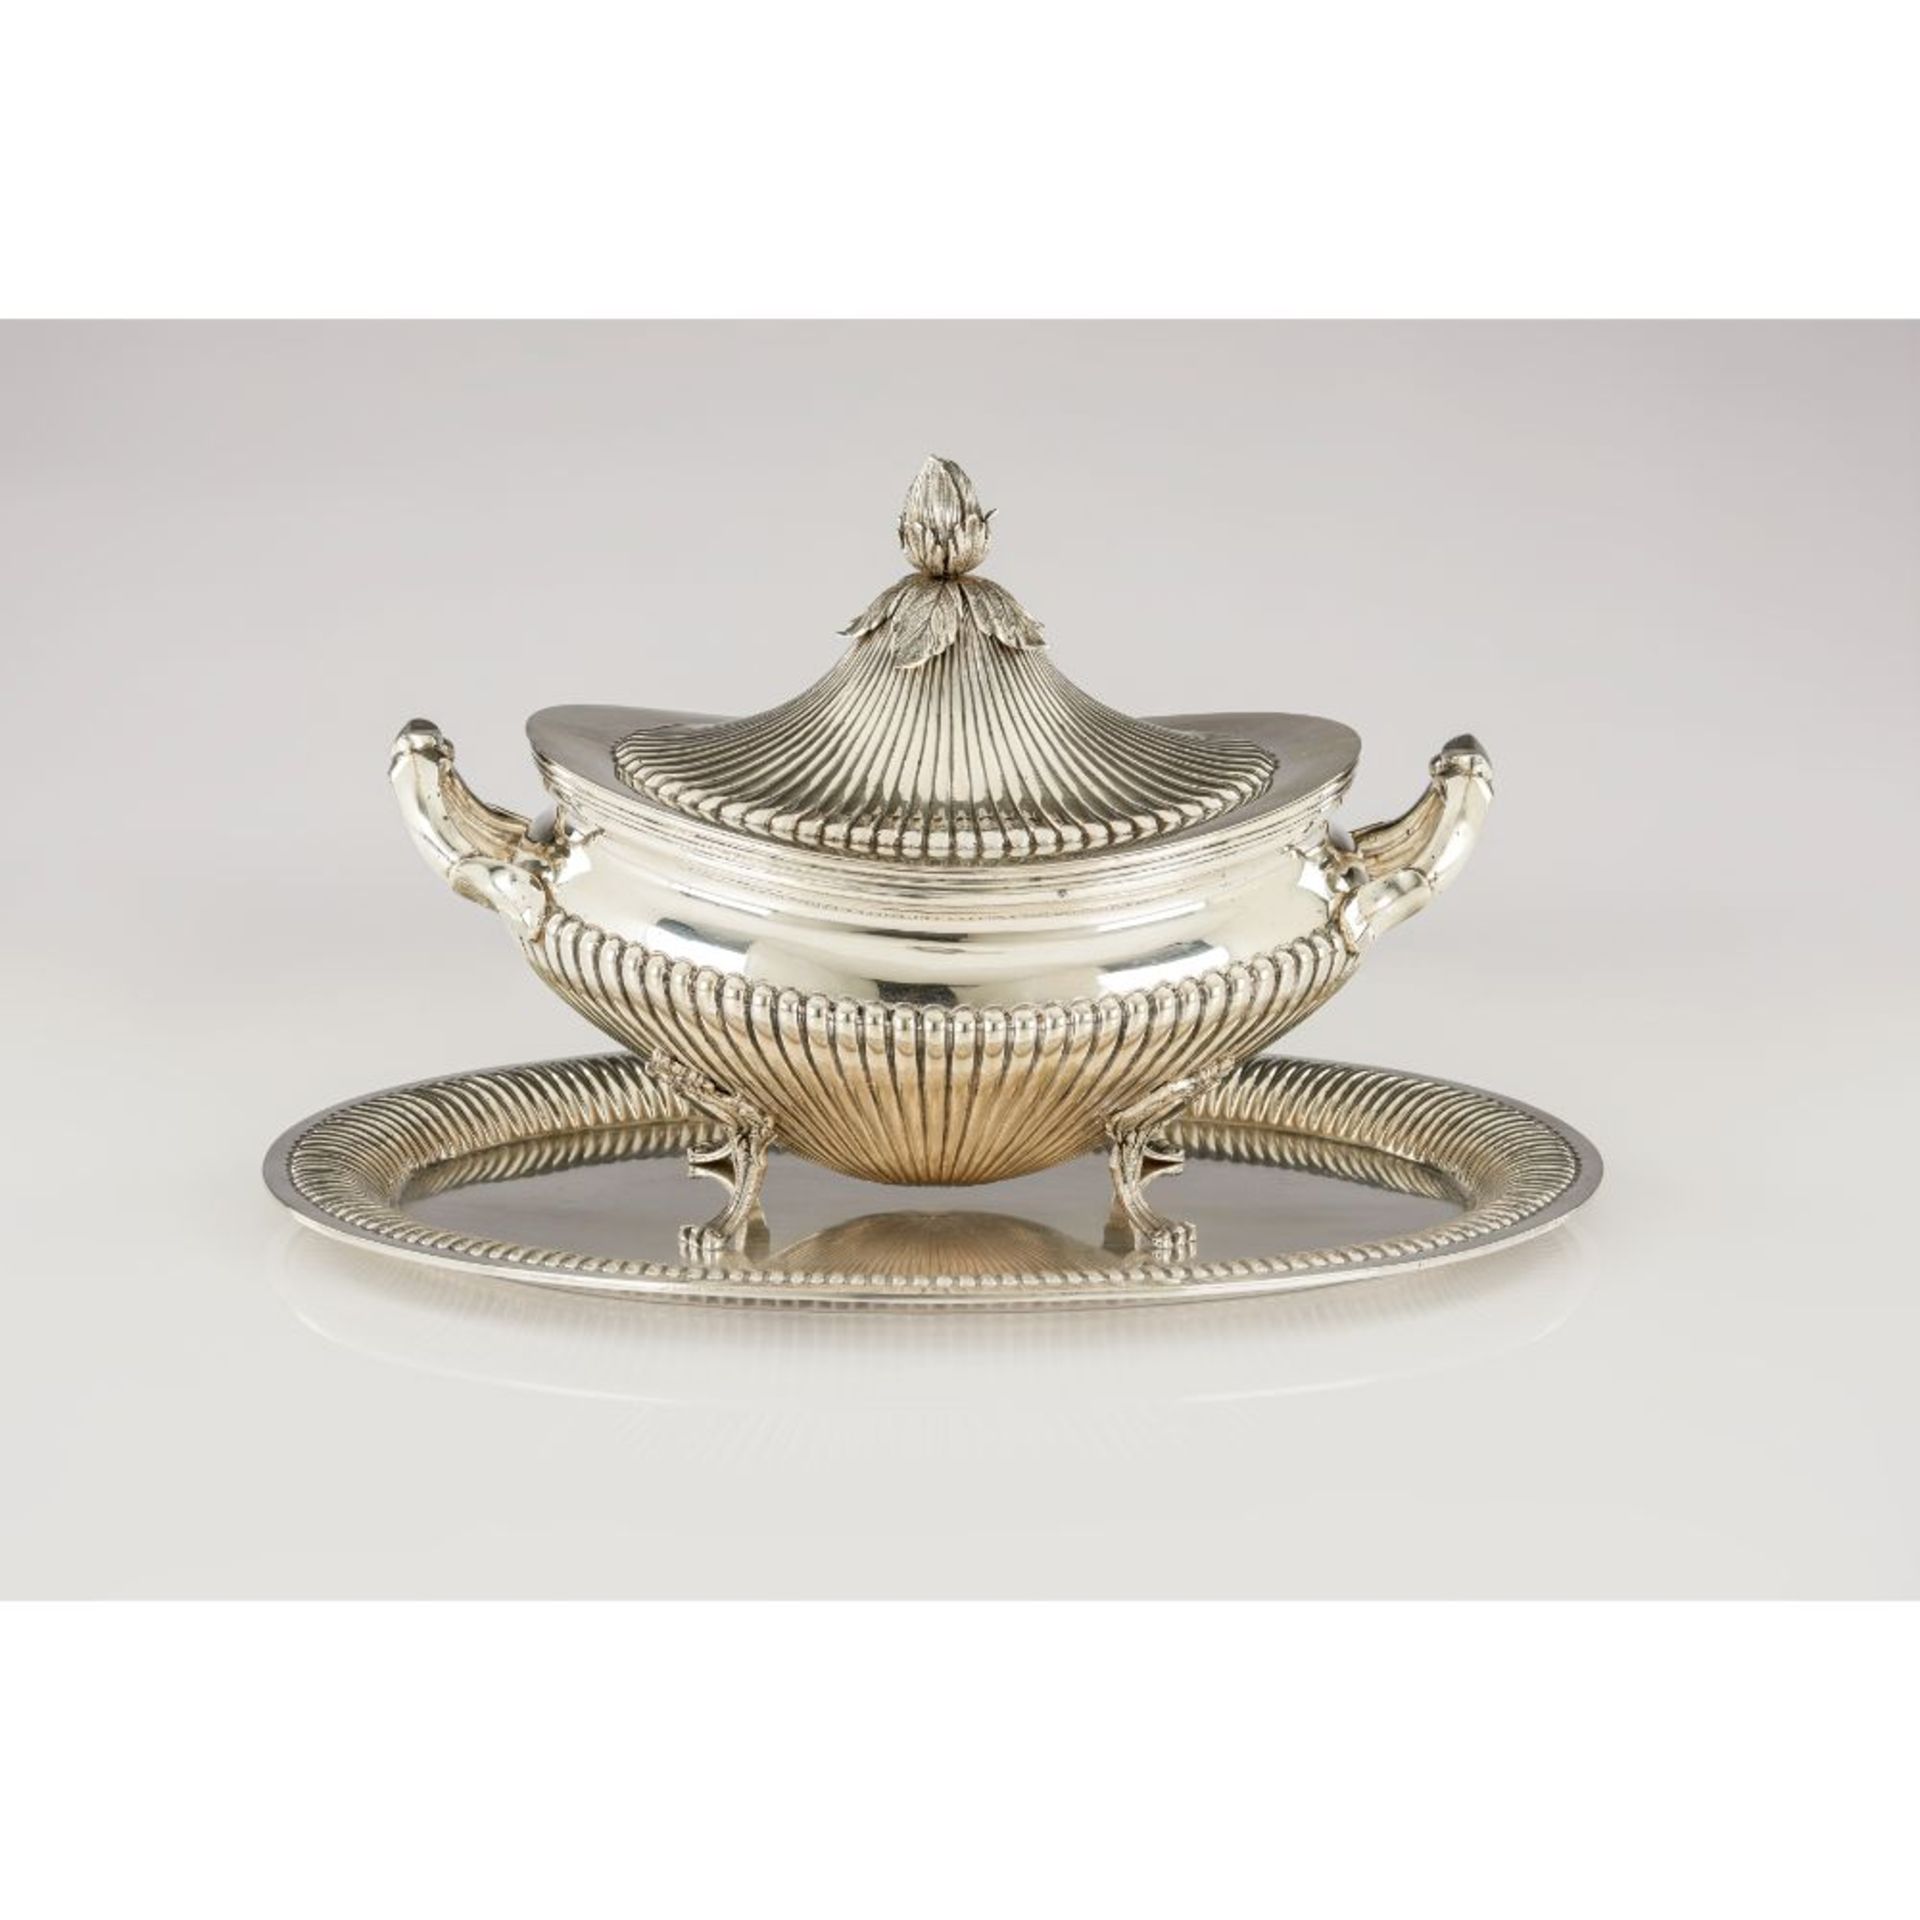 A tureen and tray